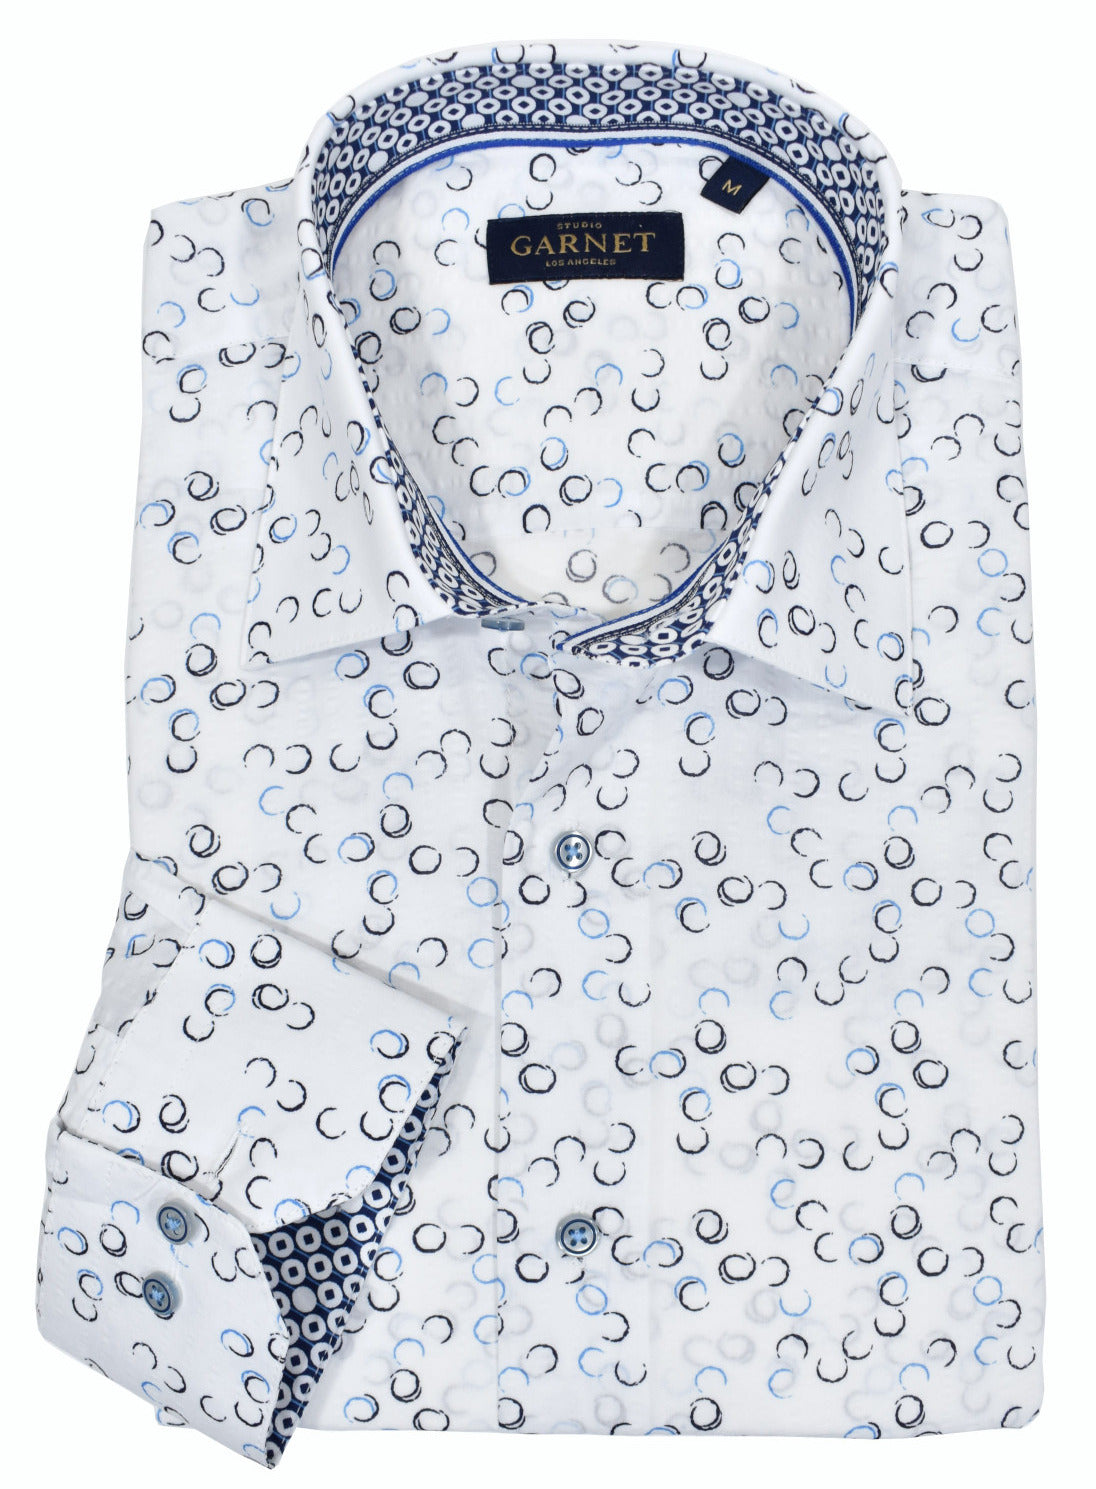 What a cool Spring/Summer shirt to wear dressy or casual. The printed colors on a white ground are perfect for jeans, pants or shorts.  Roll the sleeves, open a few buttons and you are sporting a cool fair weather look.  Medium collar, trim fabric and fashion neck band piping.  Classic shaped fit.